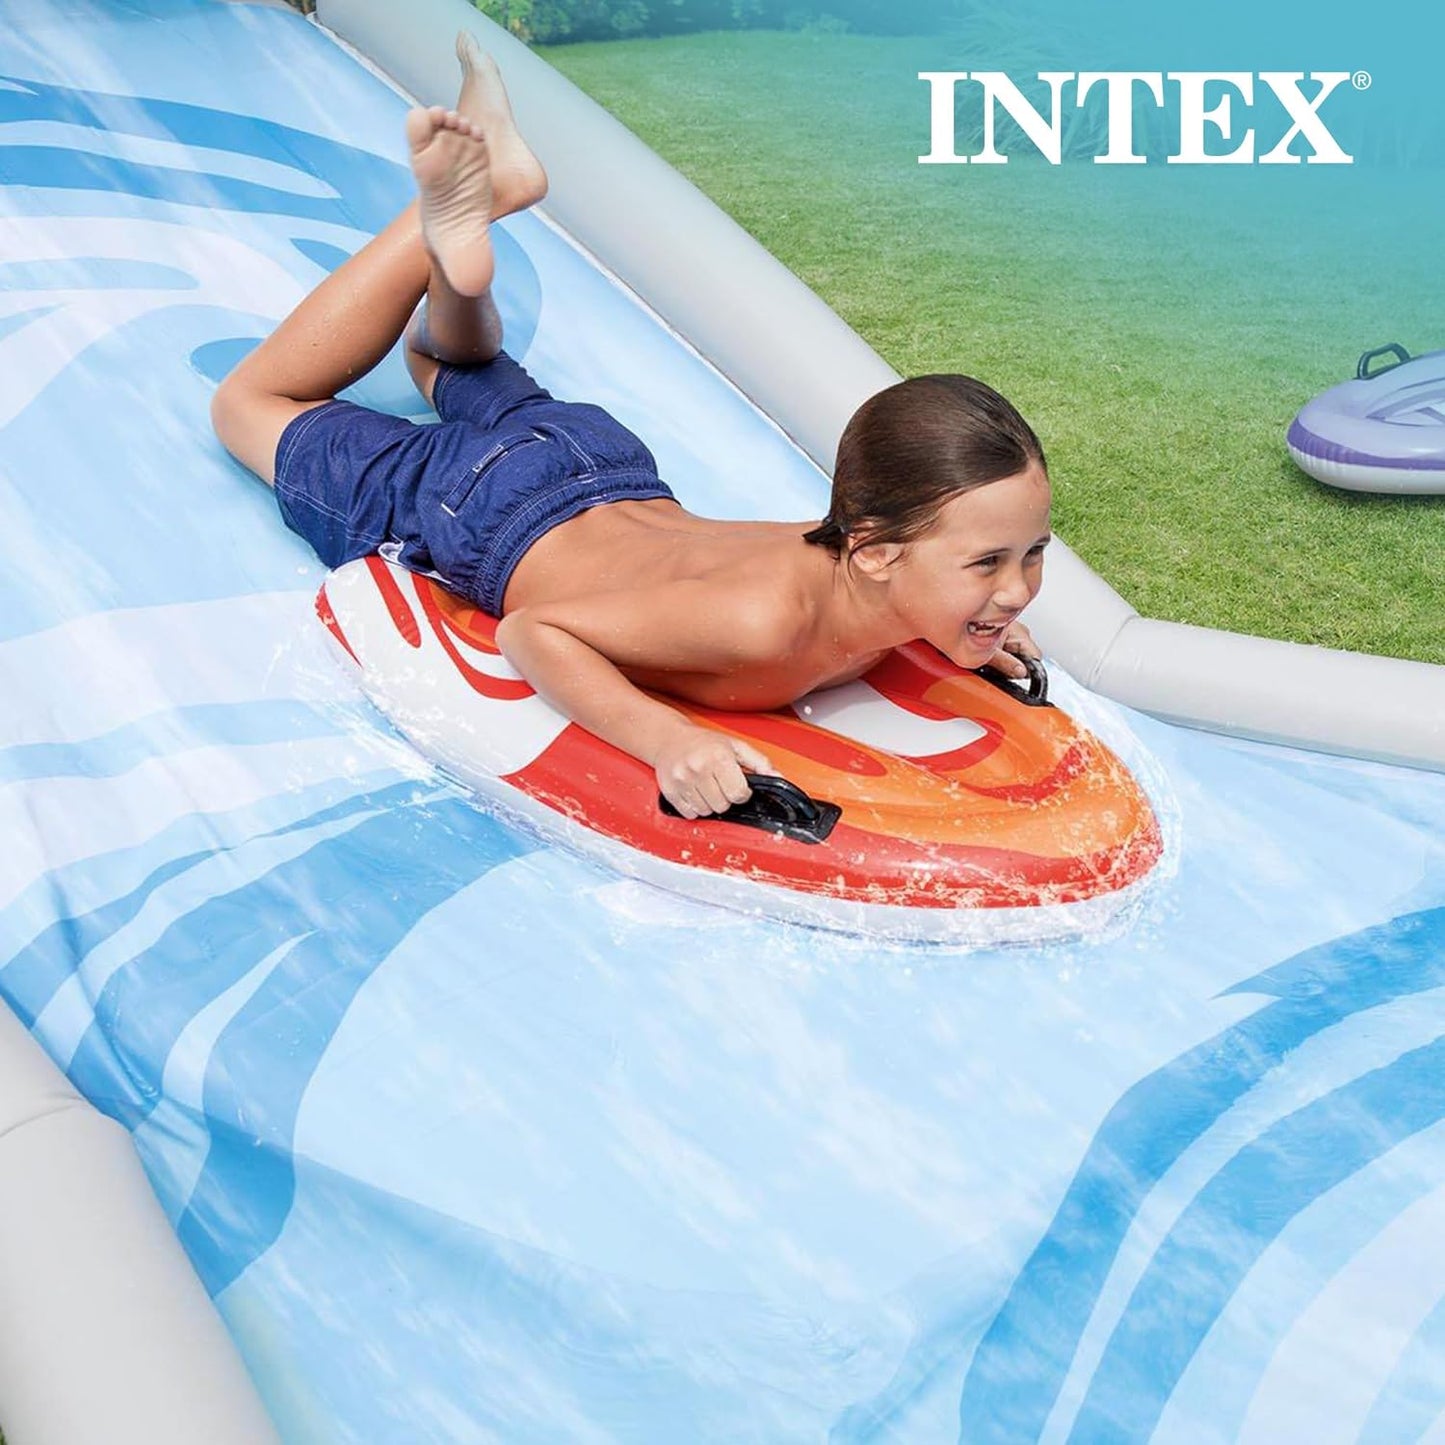 Surf 'N Slide Inflatable 15 Foot Long Kids Outdoor Backyard Splashing Water Slide with 2 Surf Rider Floats and Built-In Water Sprayers